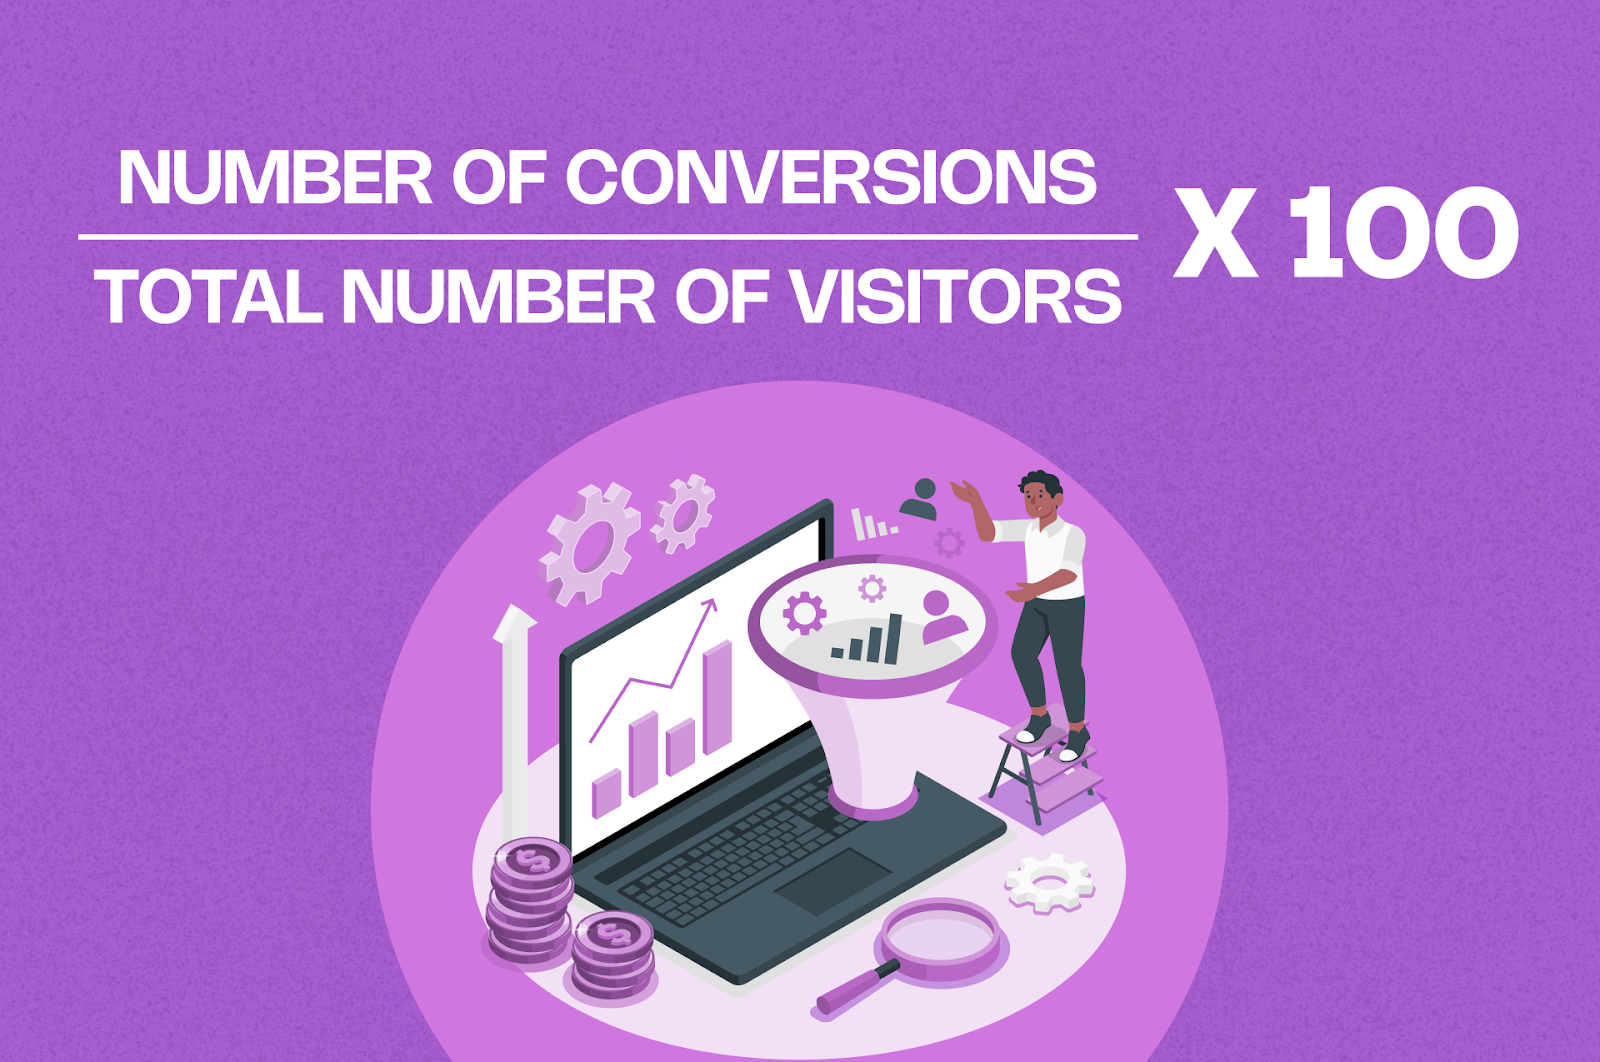 Conversion rate formula illustration on a purple background, integrating person, computer, and marketing funnel graphics, encapsulating key CRO metrics for eCommerce success.